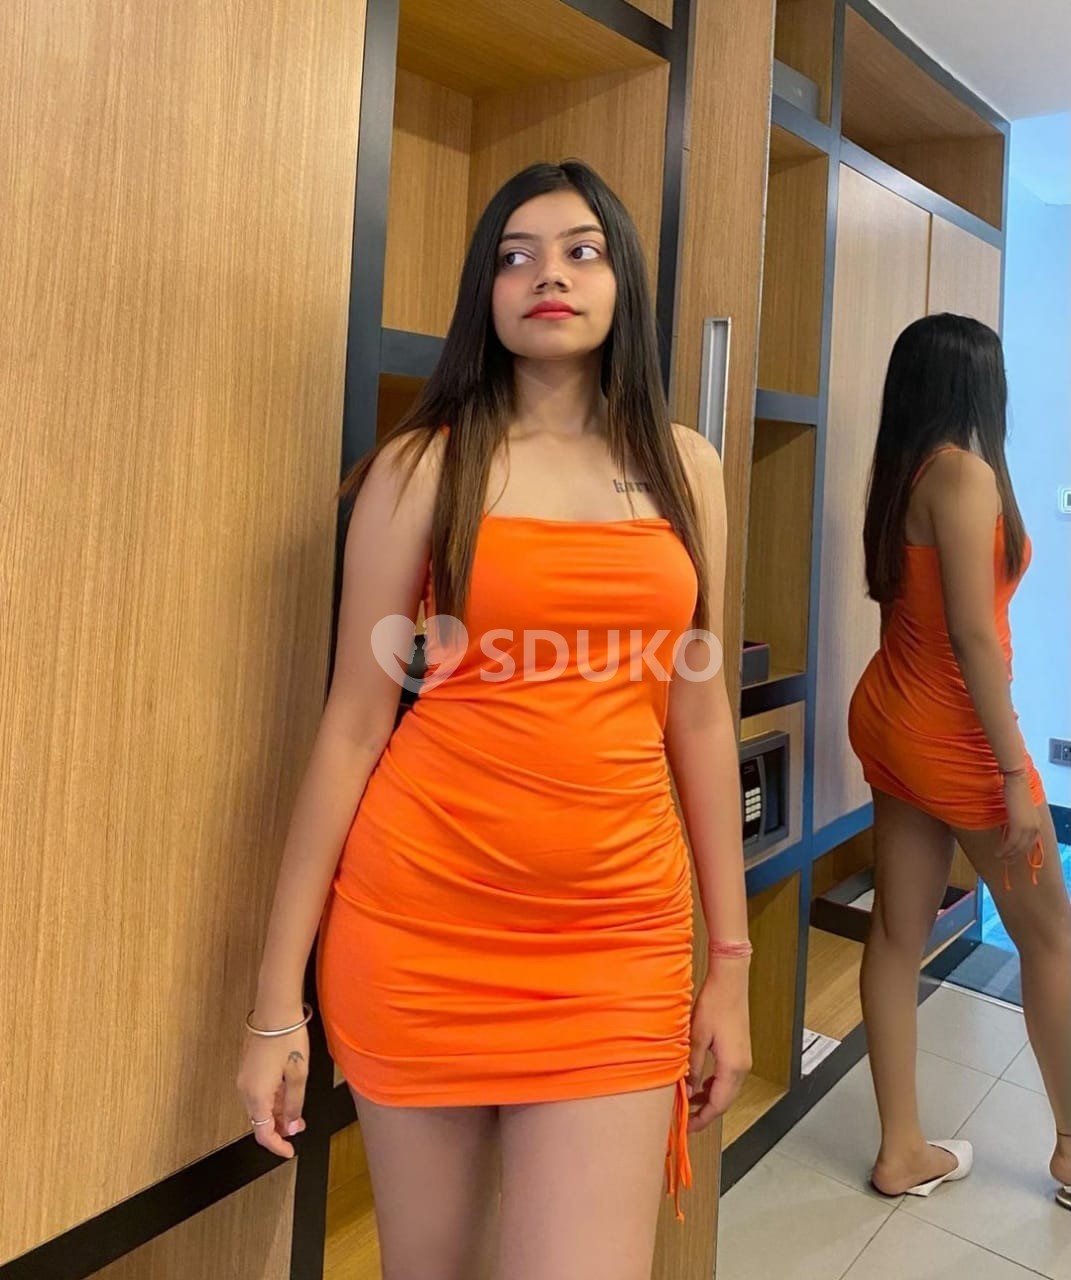 ❣️ TIRUPATI BEST VIP HIGH PROFILE COLLEGE GIRLS HOUSEWIFE HOTEL AND HOME SERVICE AVAILABLE 24*7 HOURS